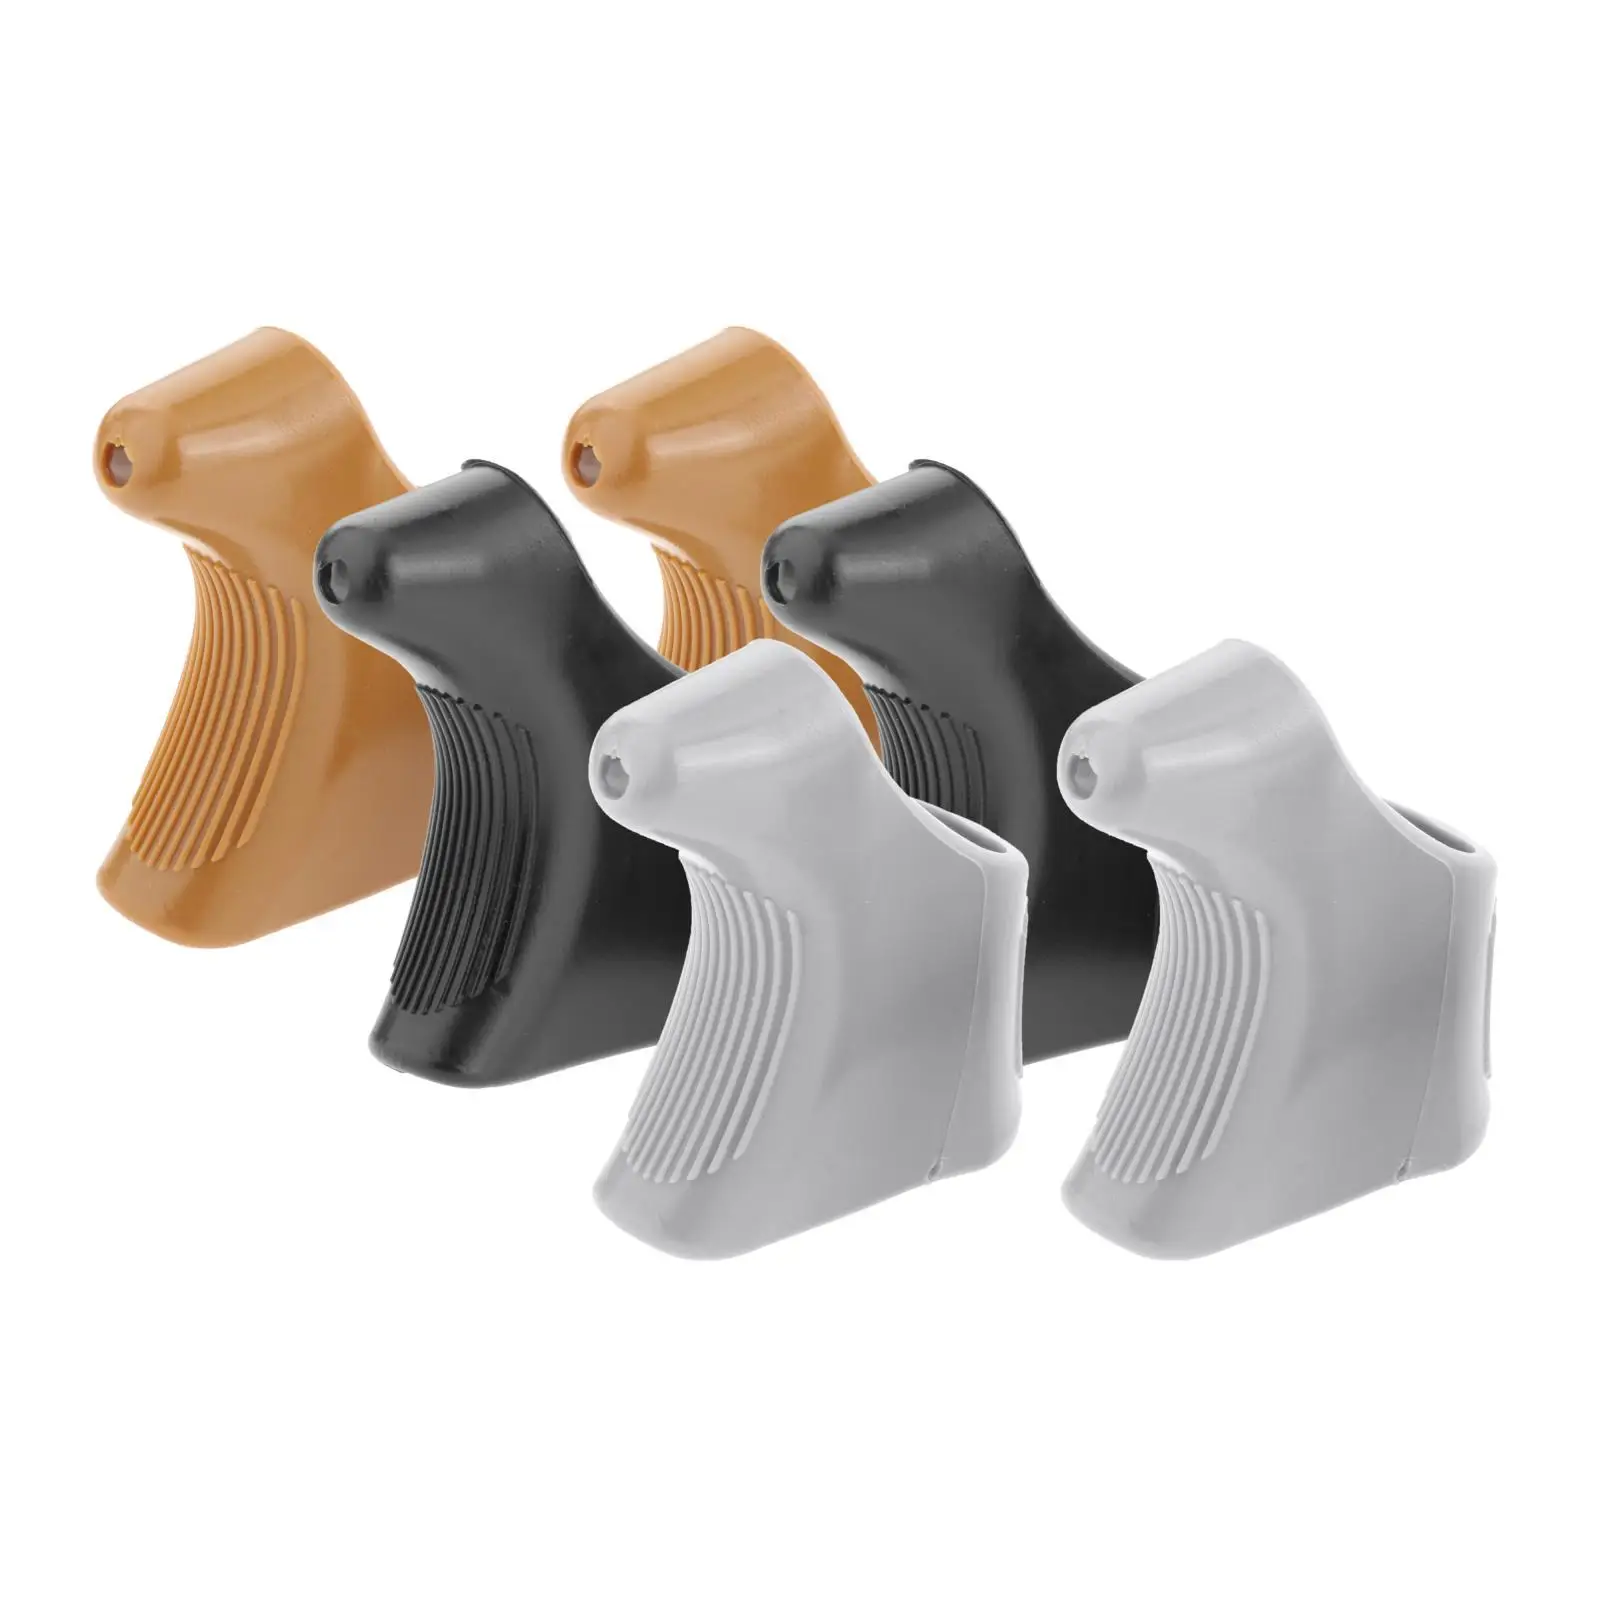 2 Pieces Brake Lever Hoods High Performance for Campagnolo Shield Bike